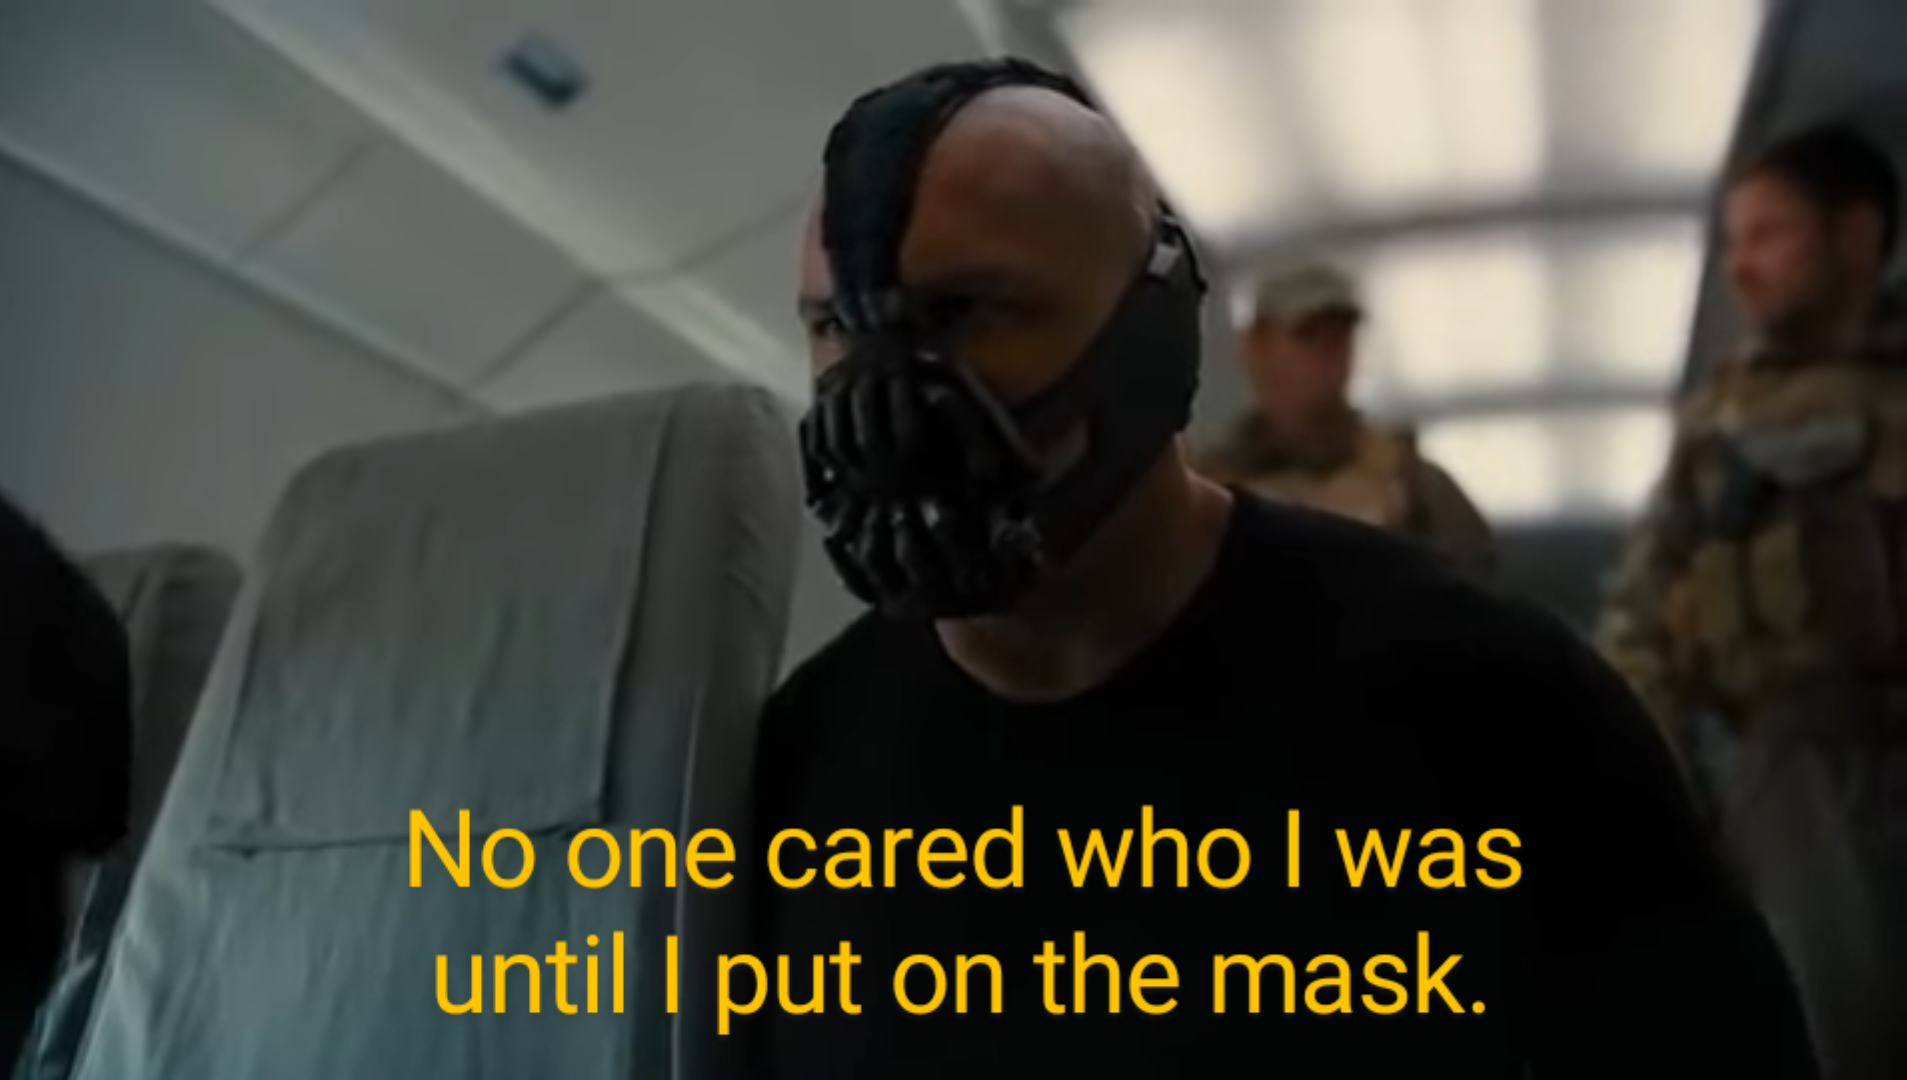 High Quality Bane: No one cared who I was until I put on the mask. Blank Meme Template